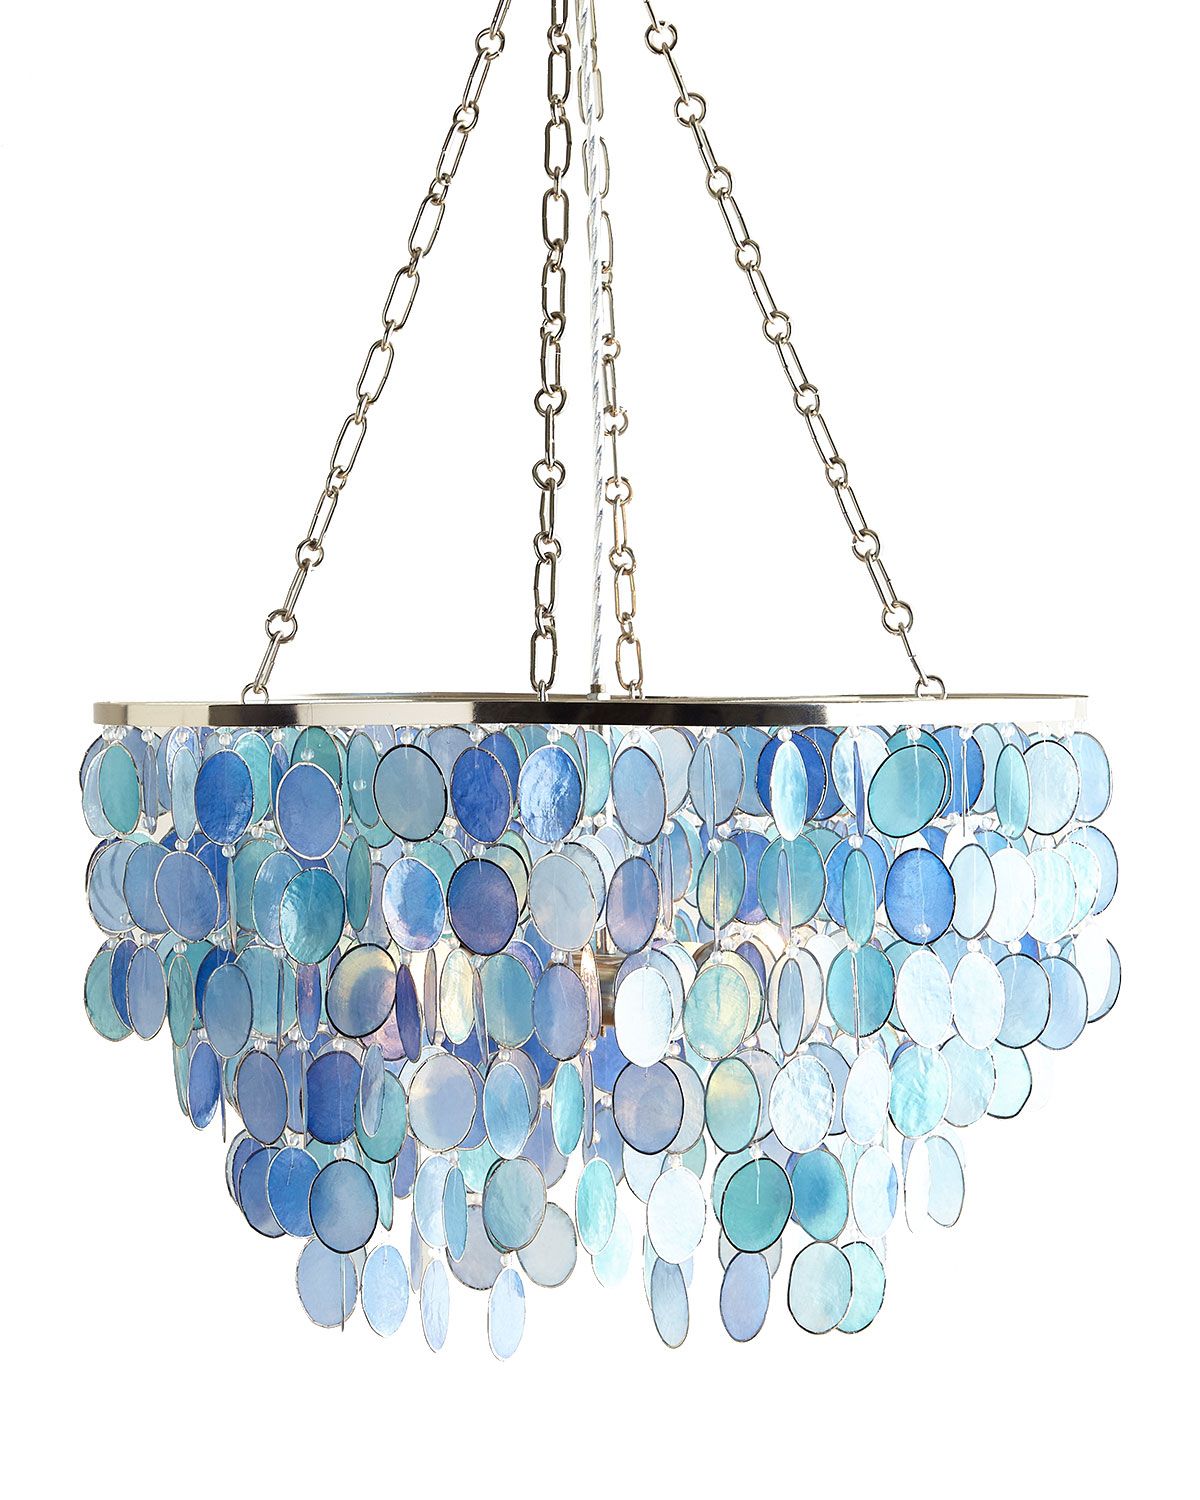 Turquoise Chandelier Light Fixtures Illuminate any Space in Style